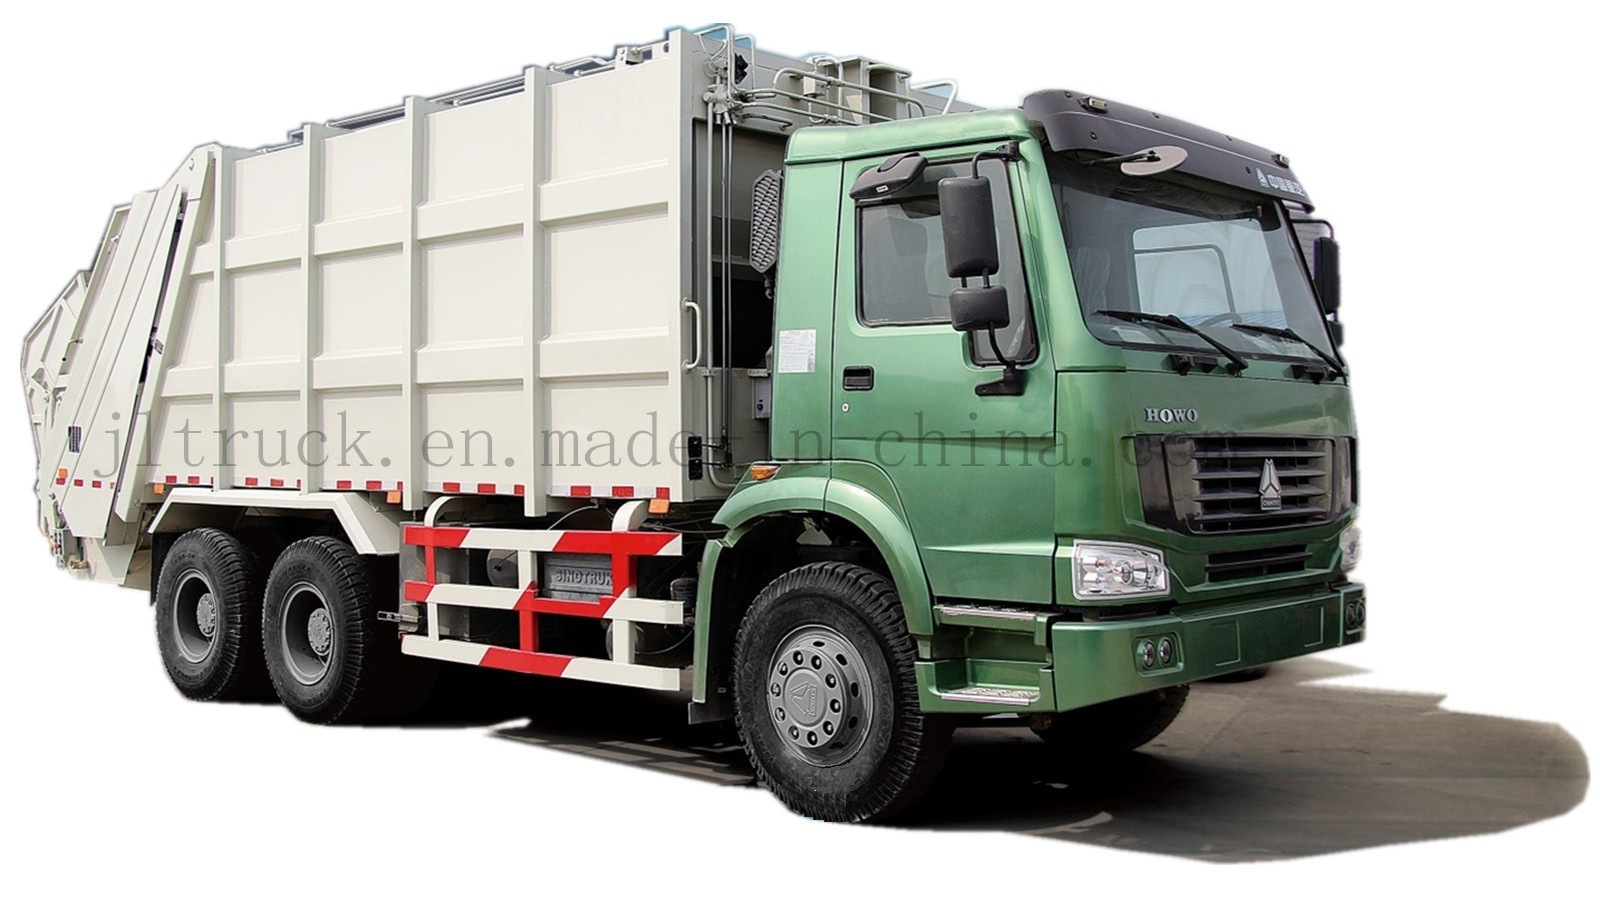 HOWO Compact Garbage Truck 6x4 (ZZHWS)